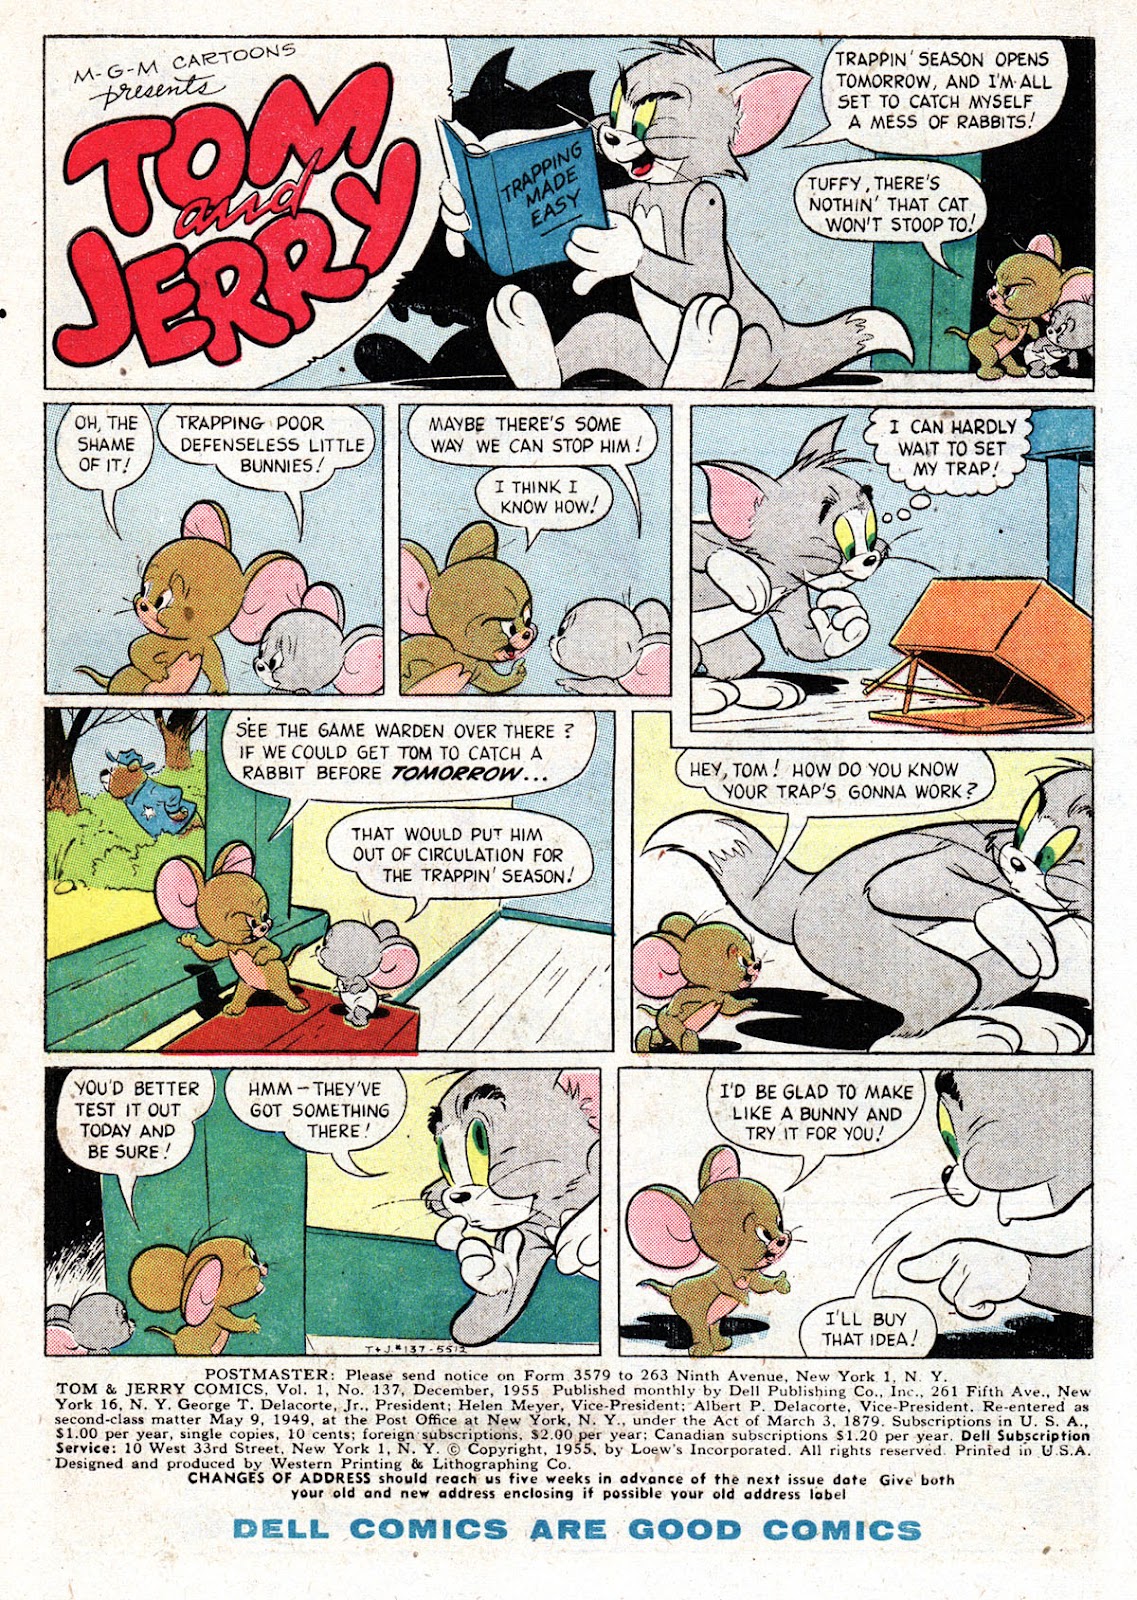 Tom & Jerry Comics issue 137 - Page 3